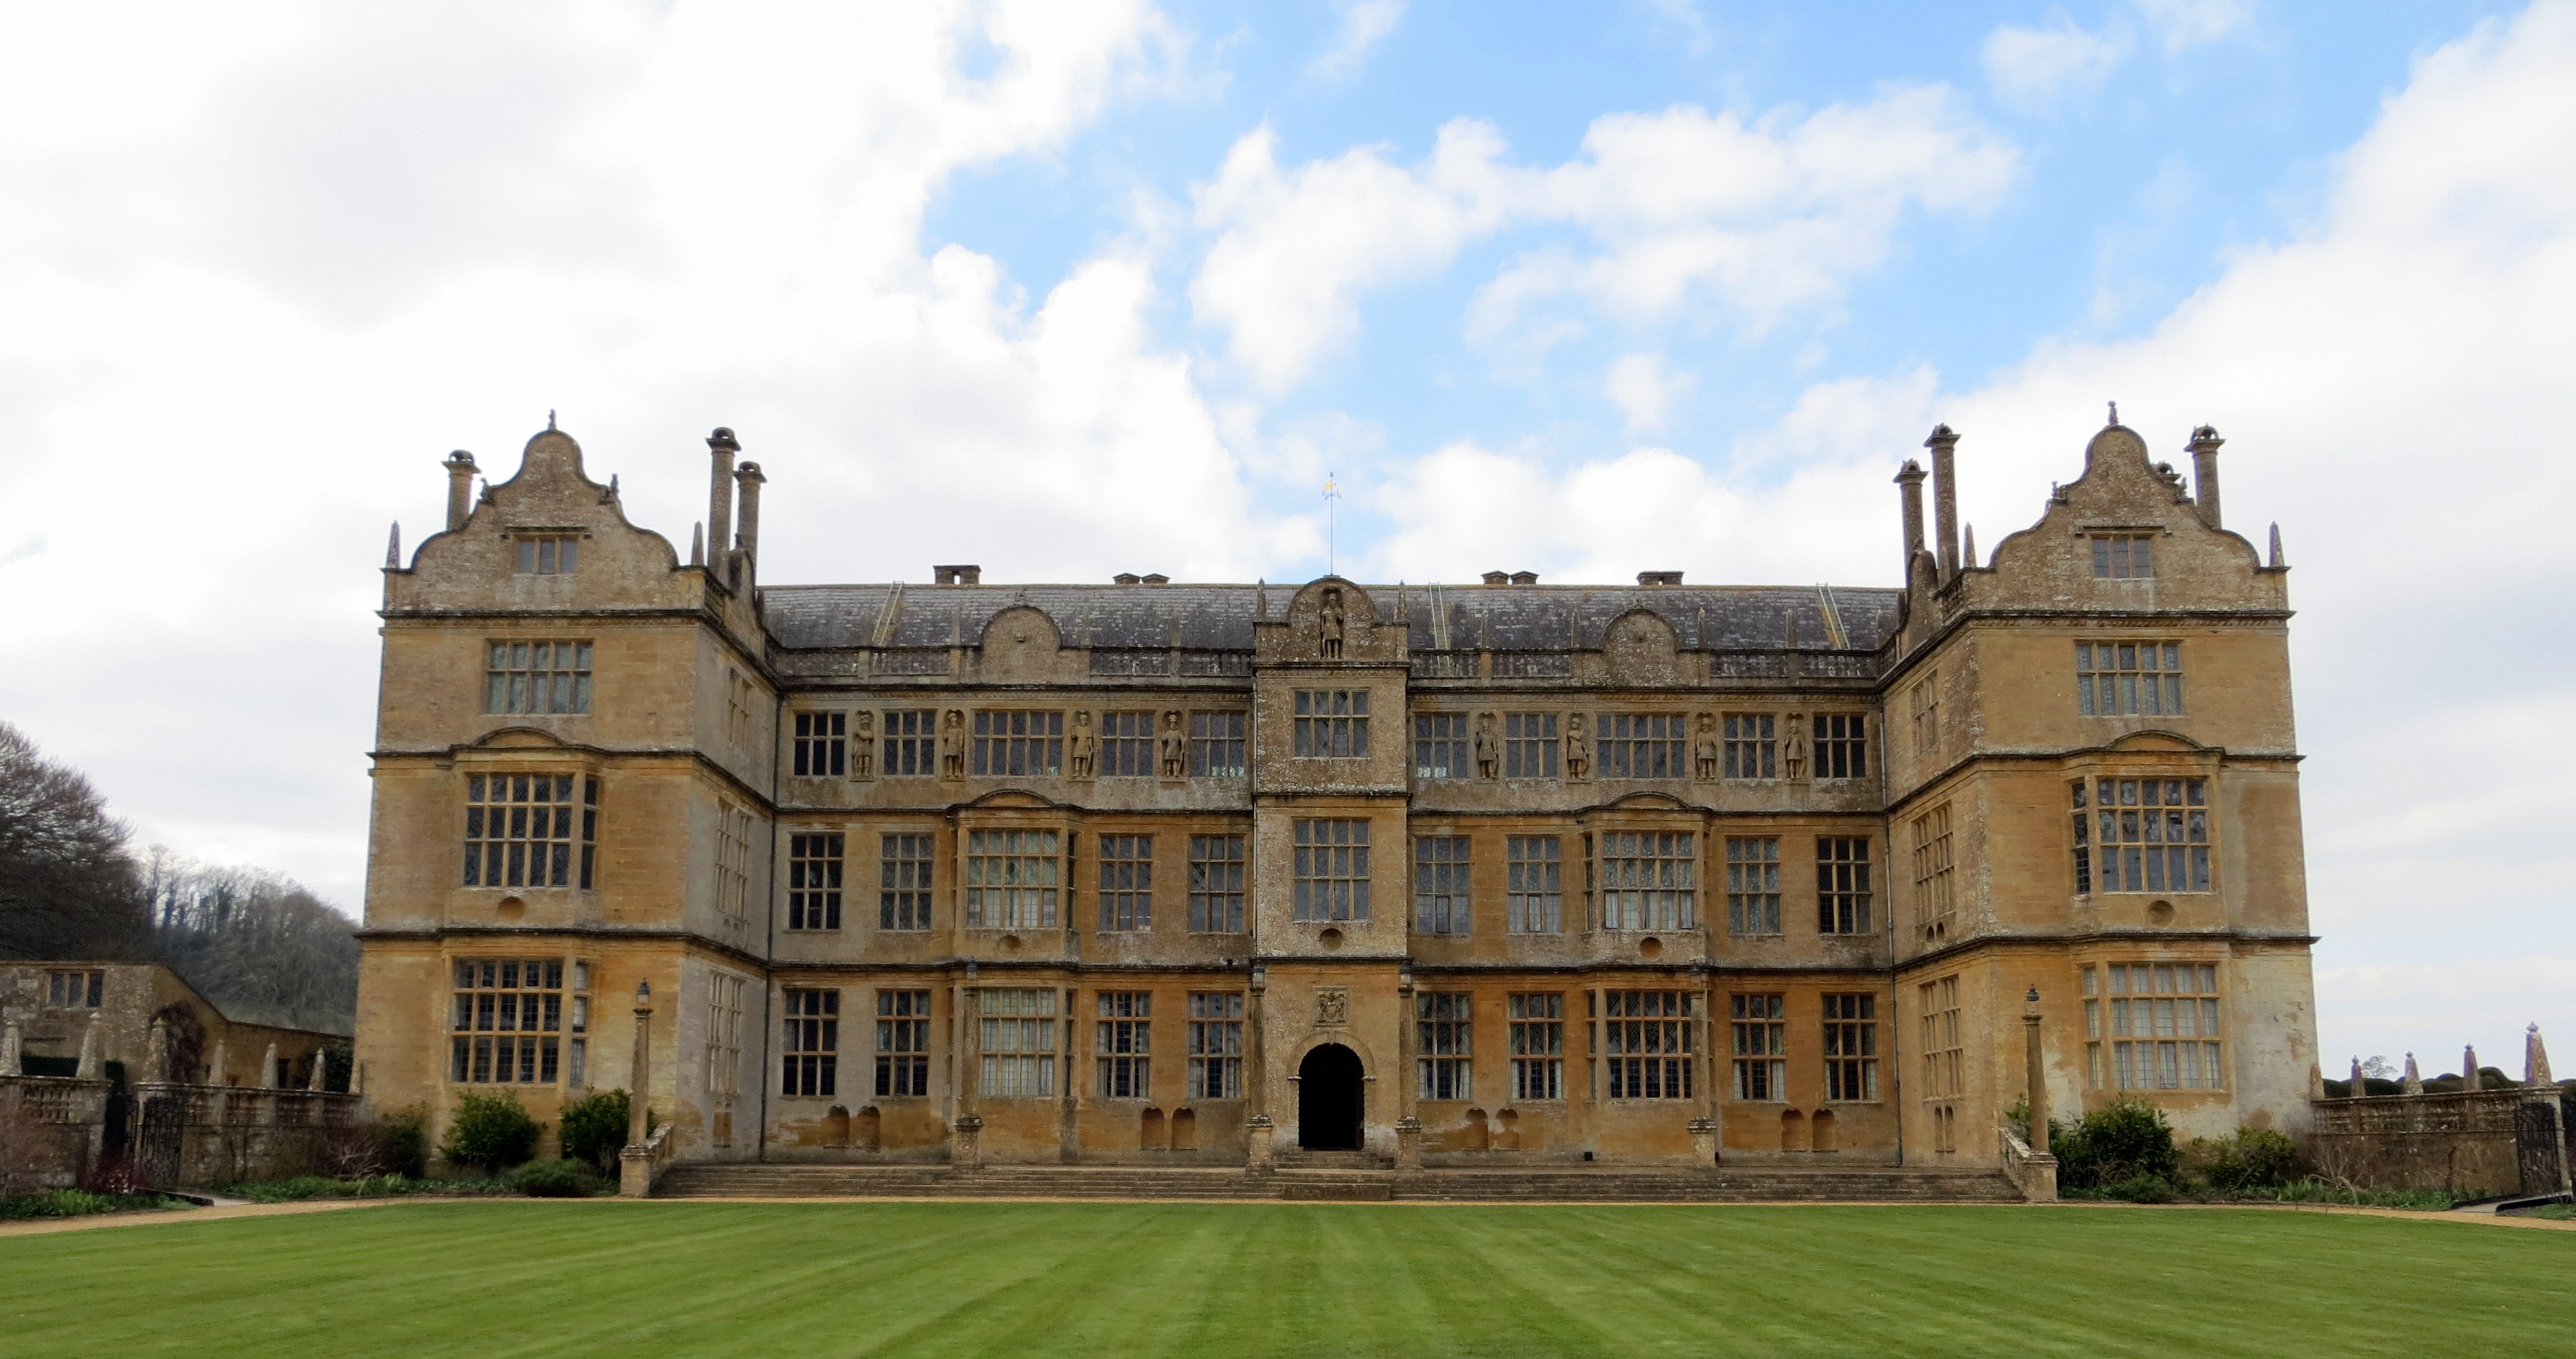 Celebrate 200 Years Of Jane Austen By Escaping To A Stately Manor.